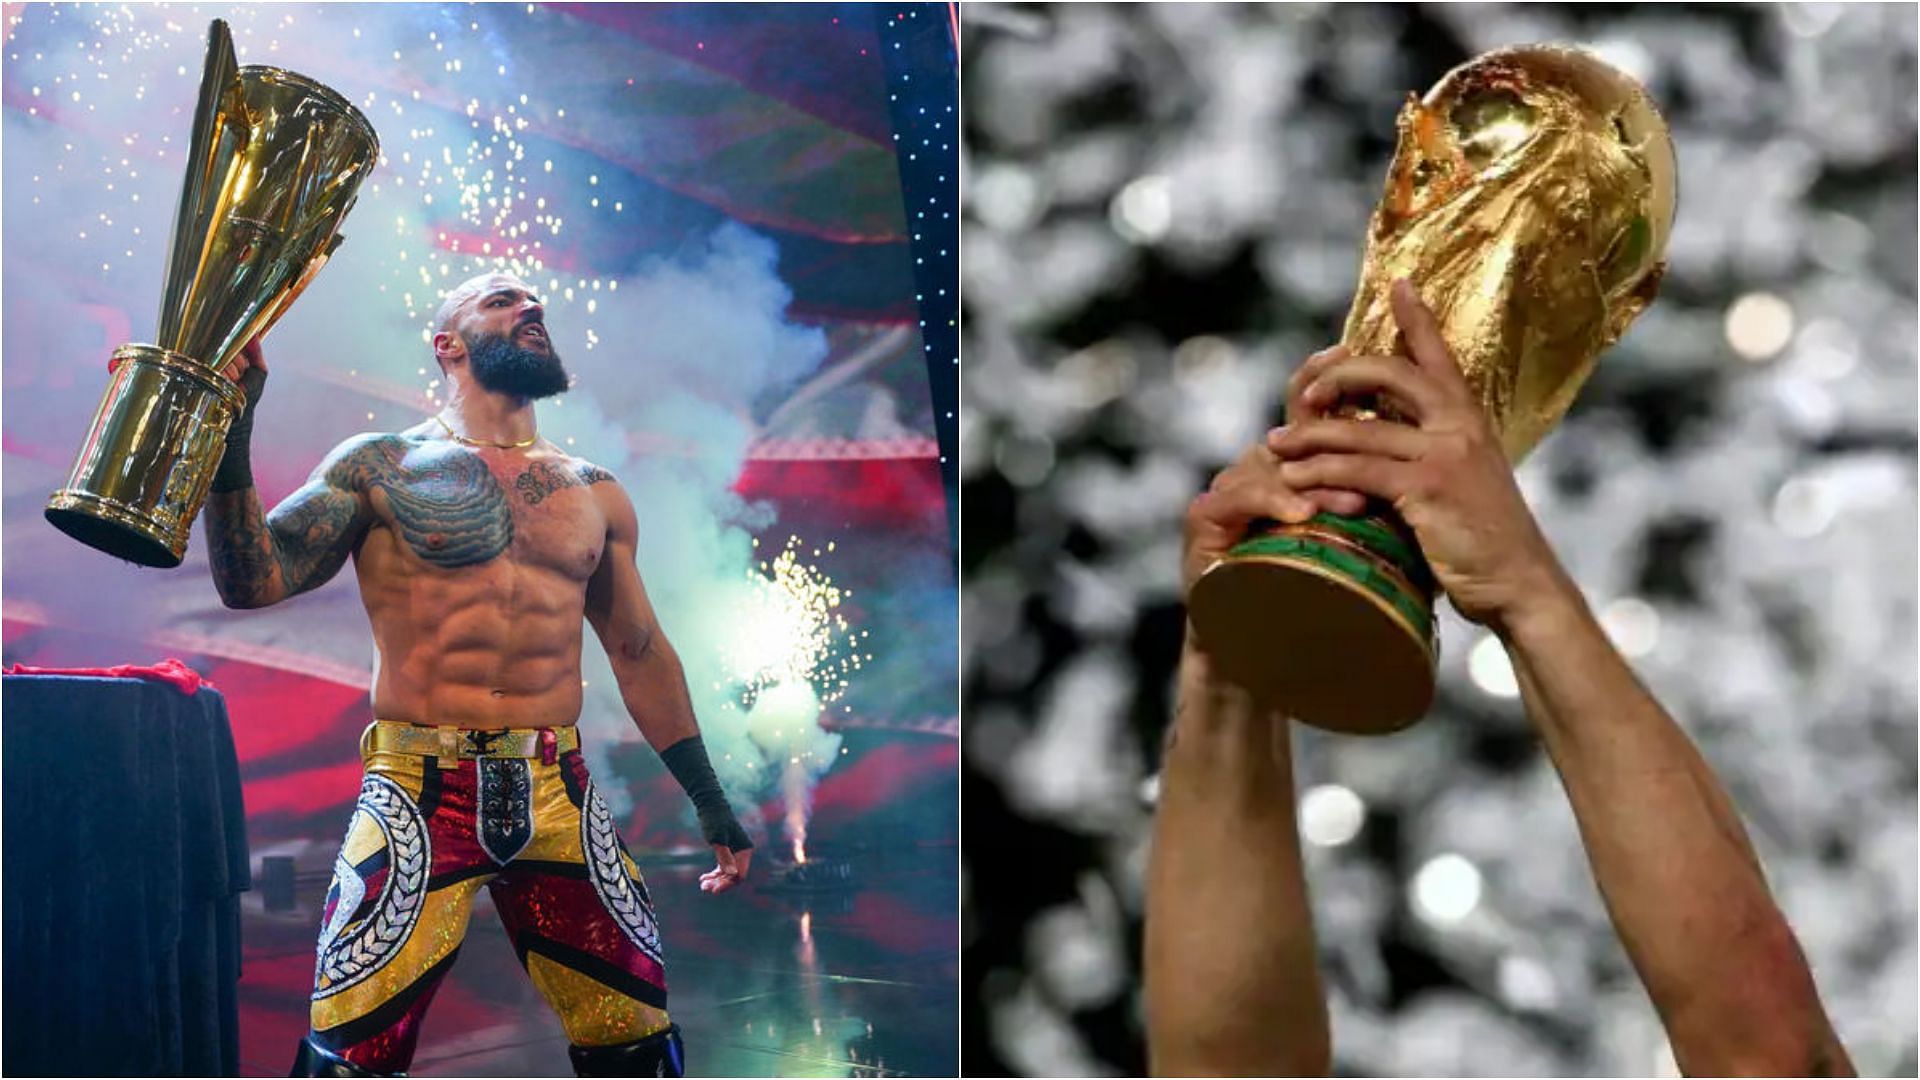 The WWE World Cup was inspired by the FIFA World Cup